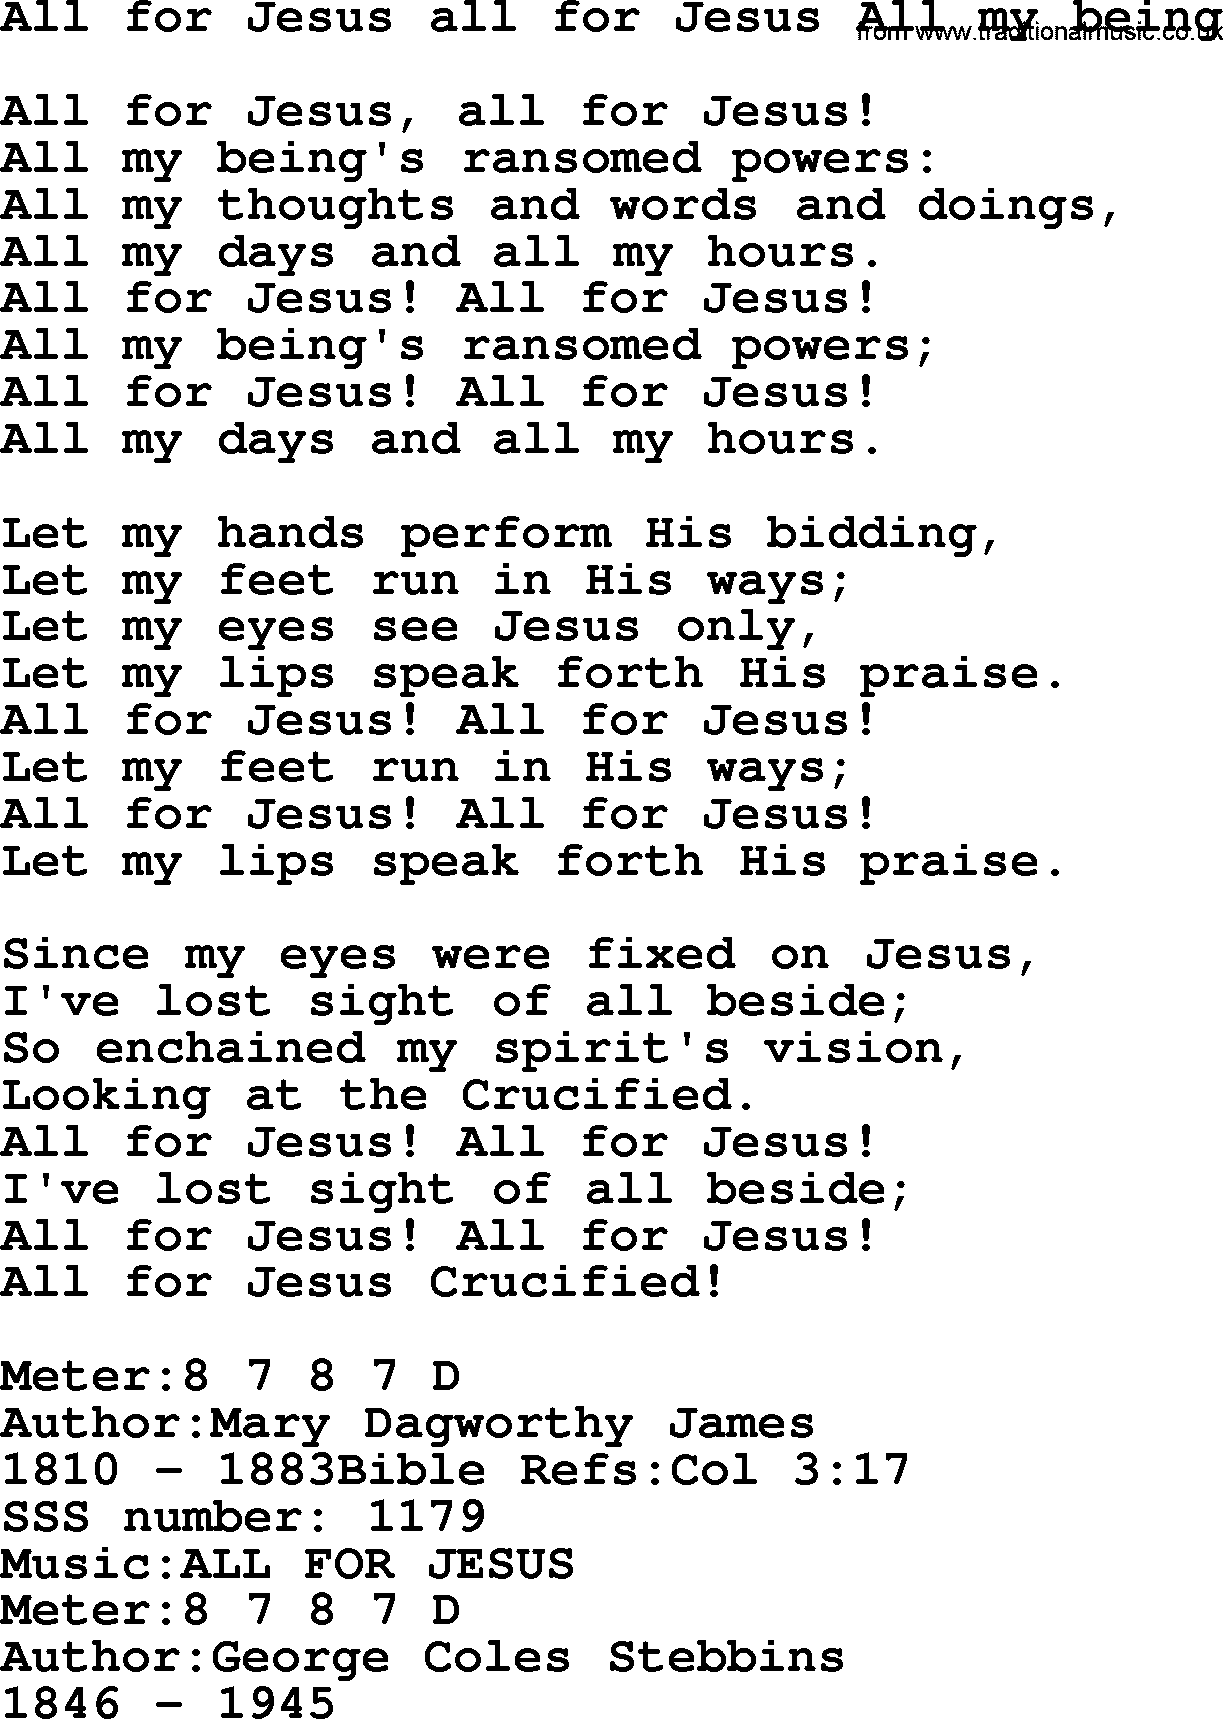 Sacred Songs and Solos complete, 1200 Hymns, title: All For Jesus All For Jesus All My Being, lyrics and PDF